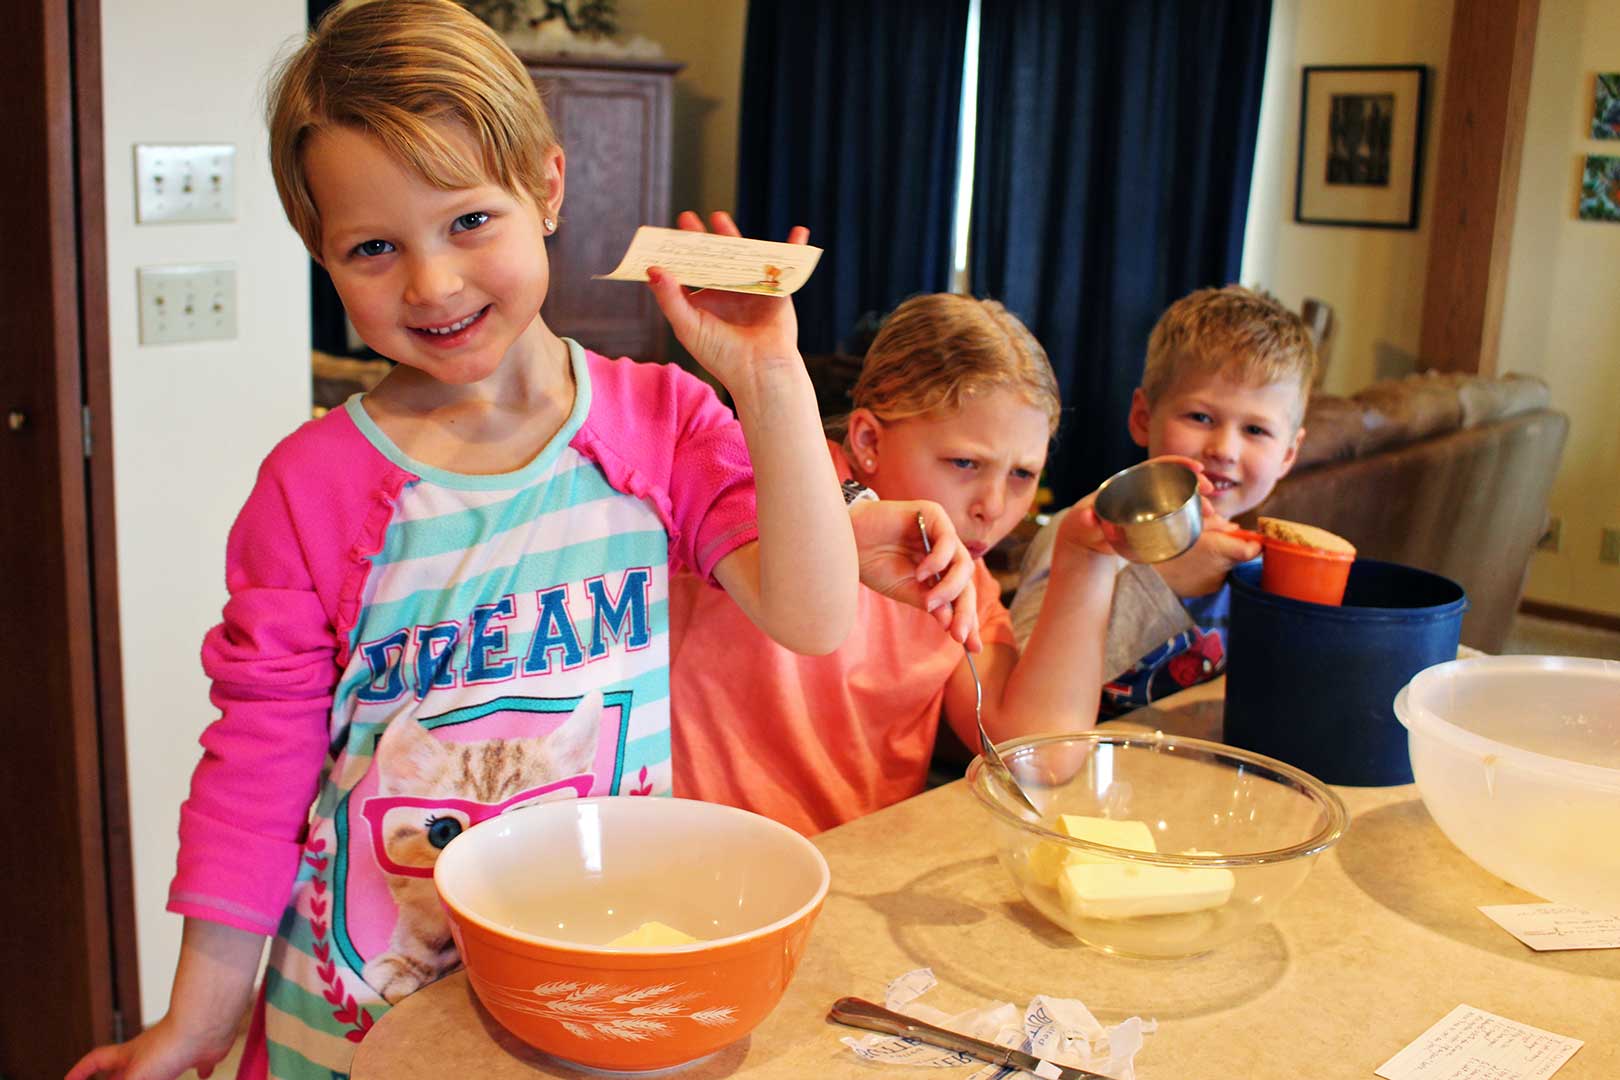 Two girls and a boy holding ingredients for a cookie recipe sitting at the kitchen counter.